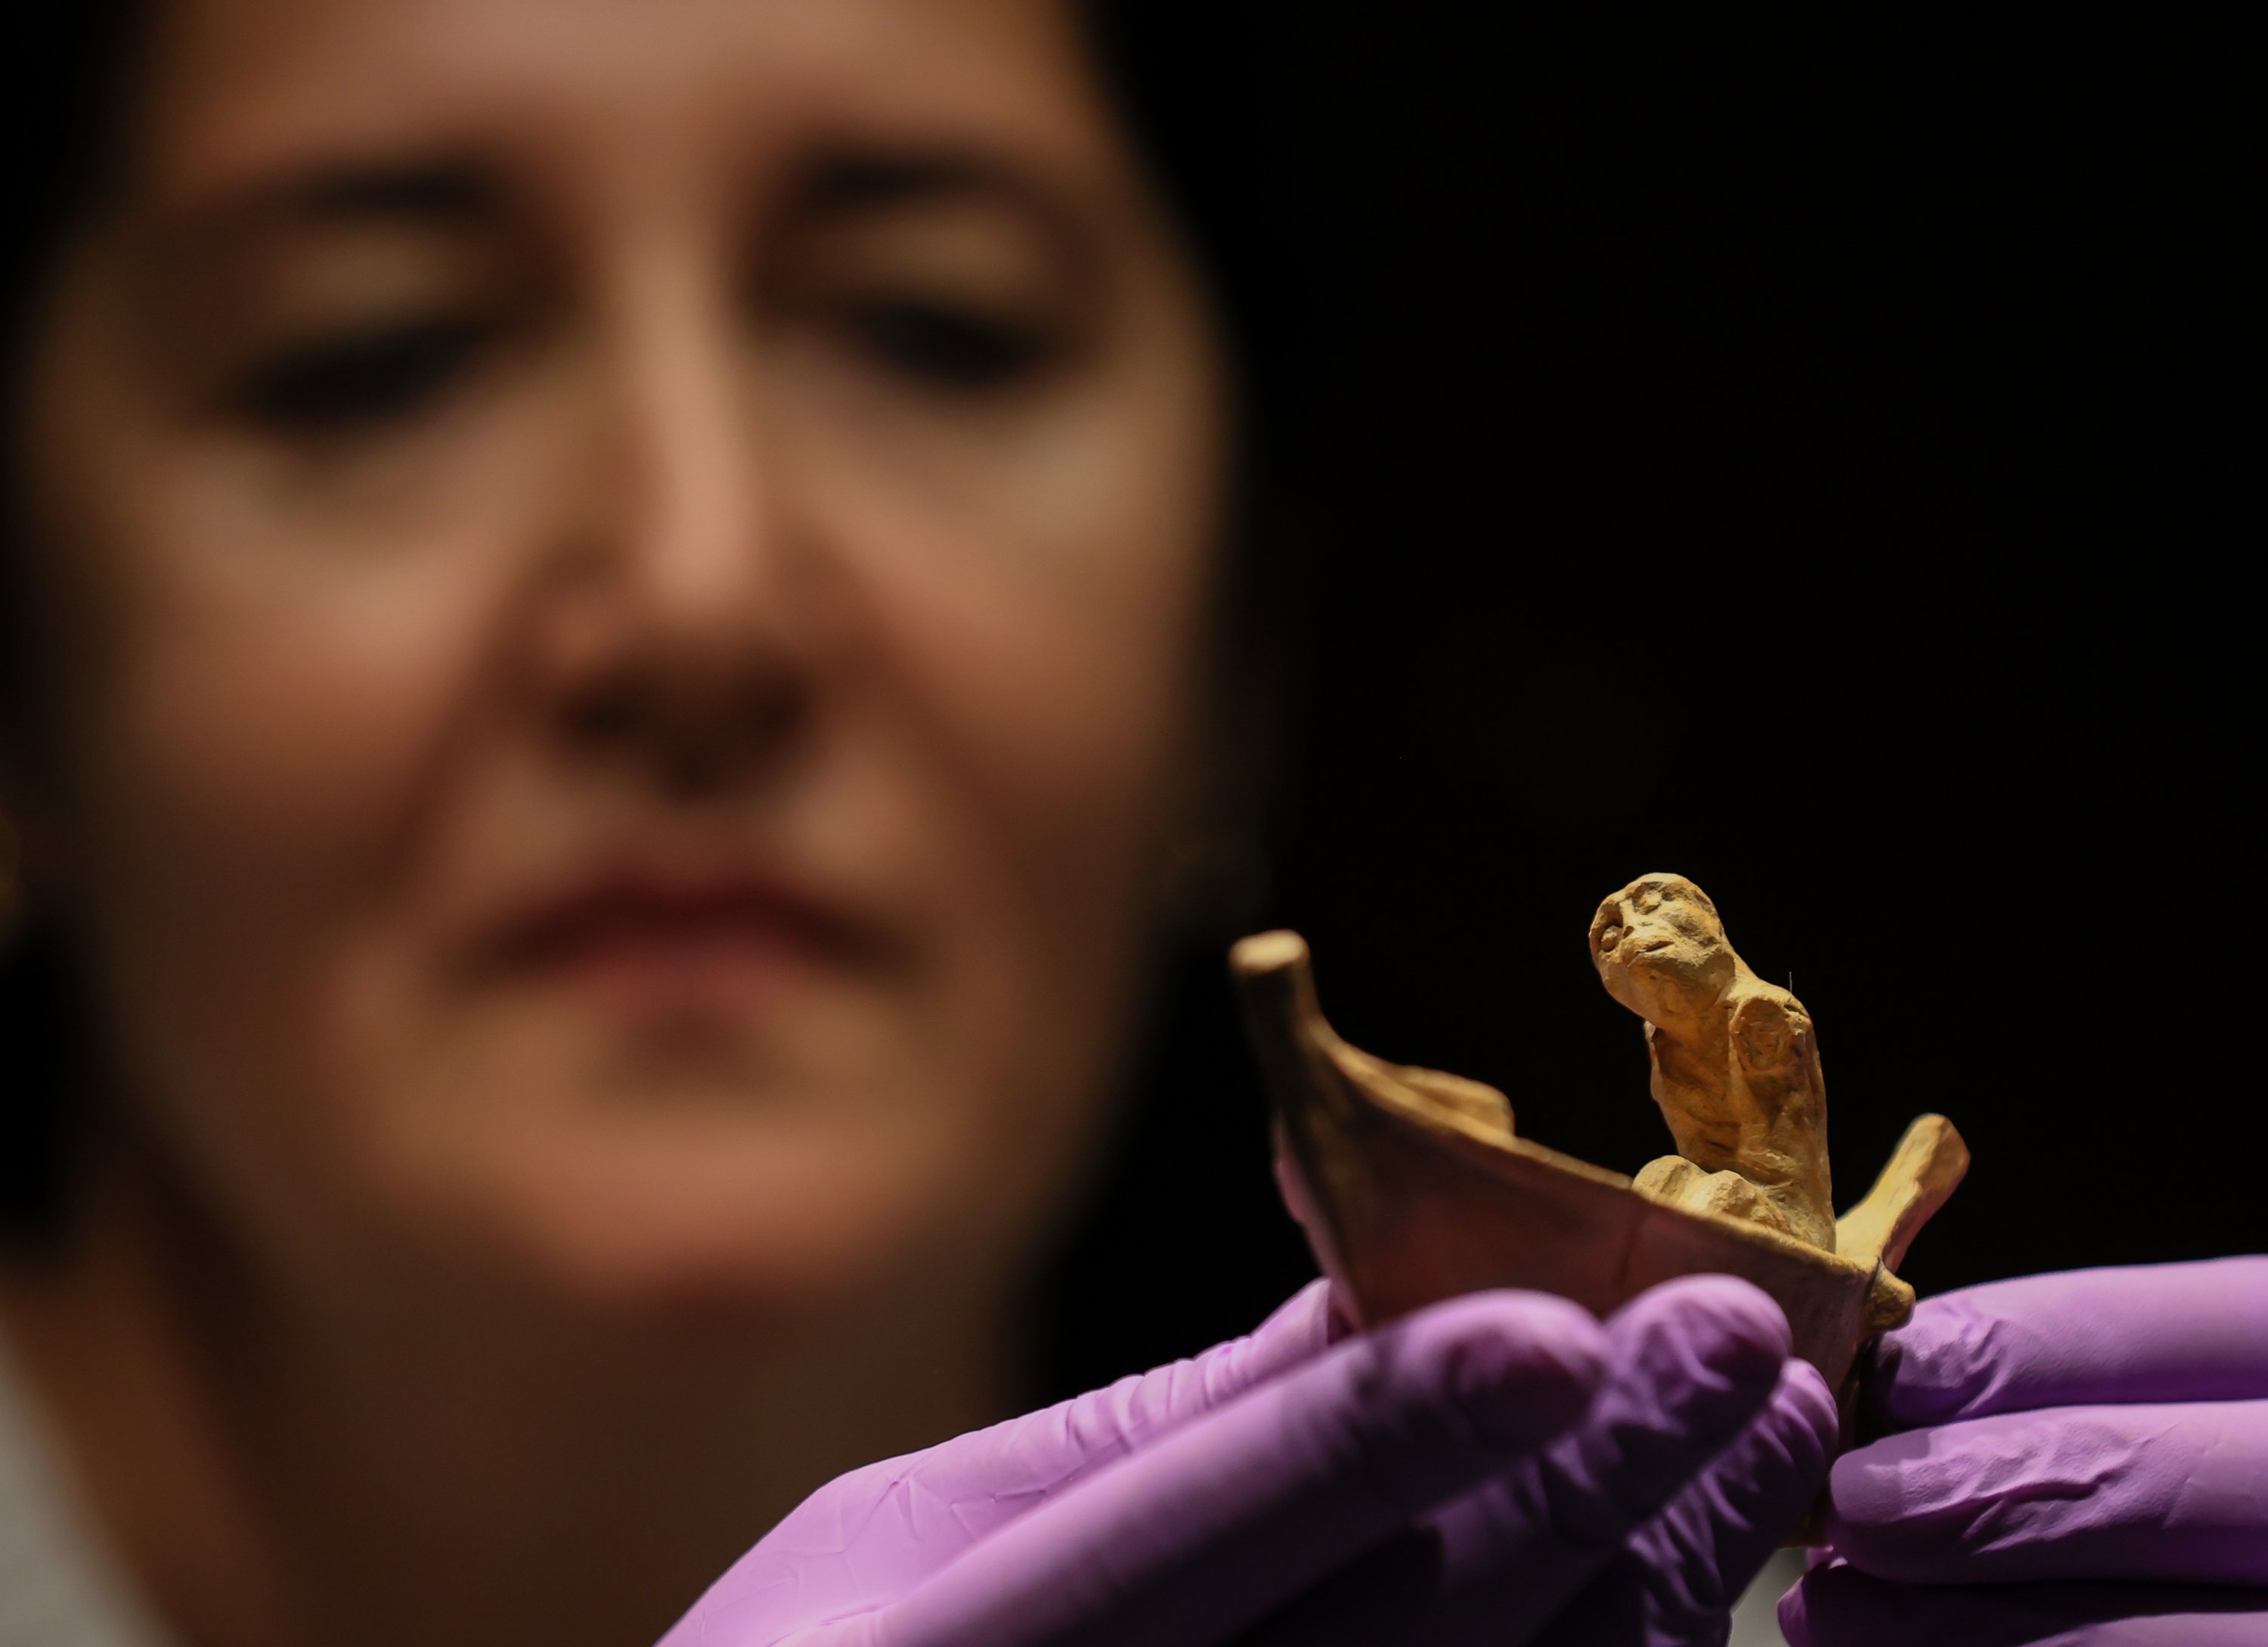 Izmir Archeology Museum assistant manager Elif Erginer shows the 2,400-year-old statuette depicting the ferryman of the dead, Charon, Izmir, Türkiye, Nov. 15, 2022. (AA Photo)